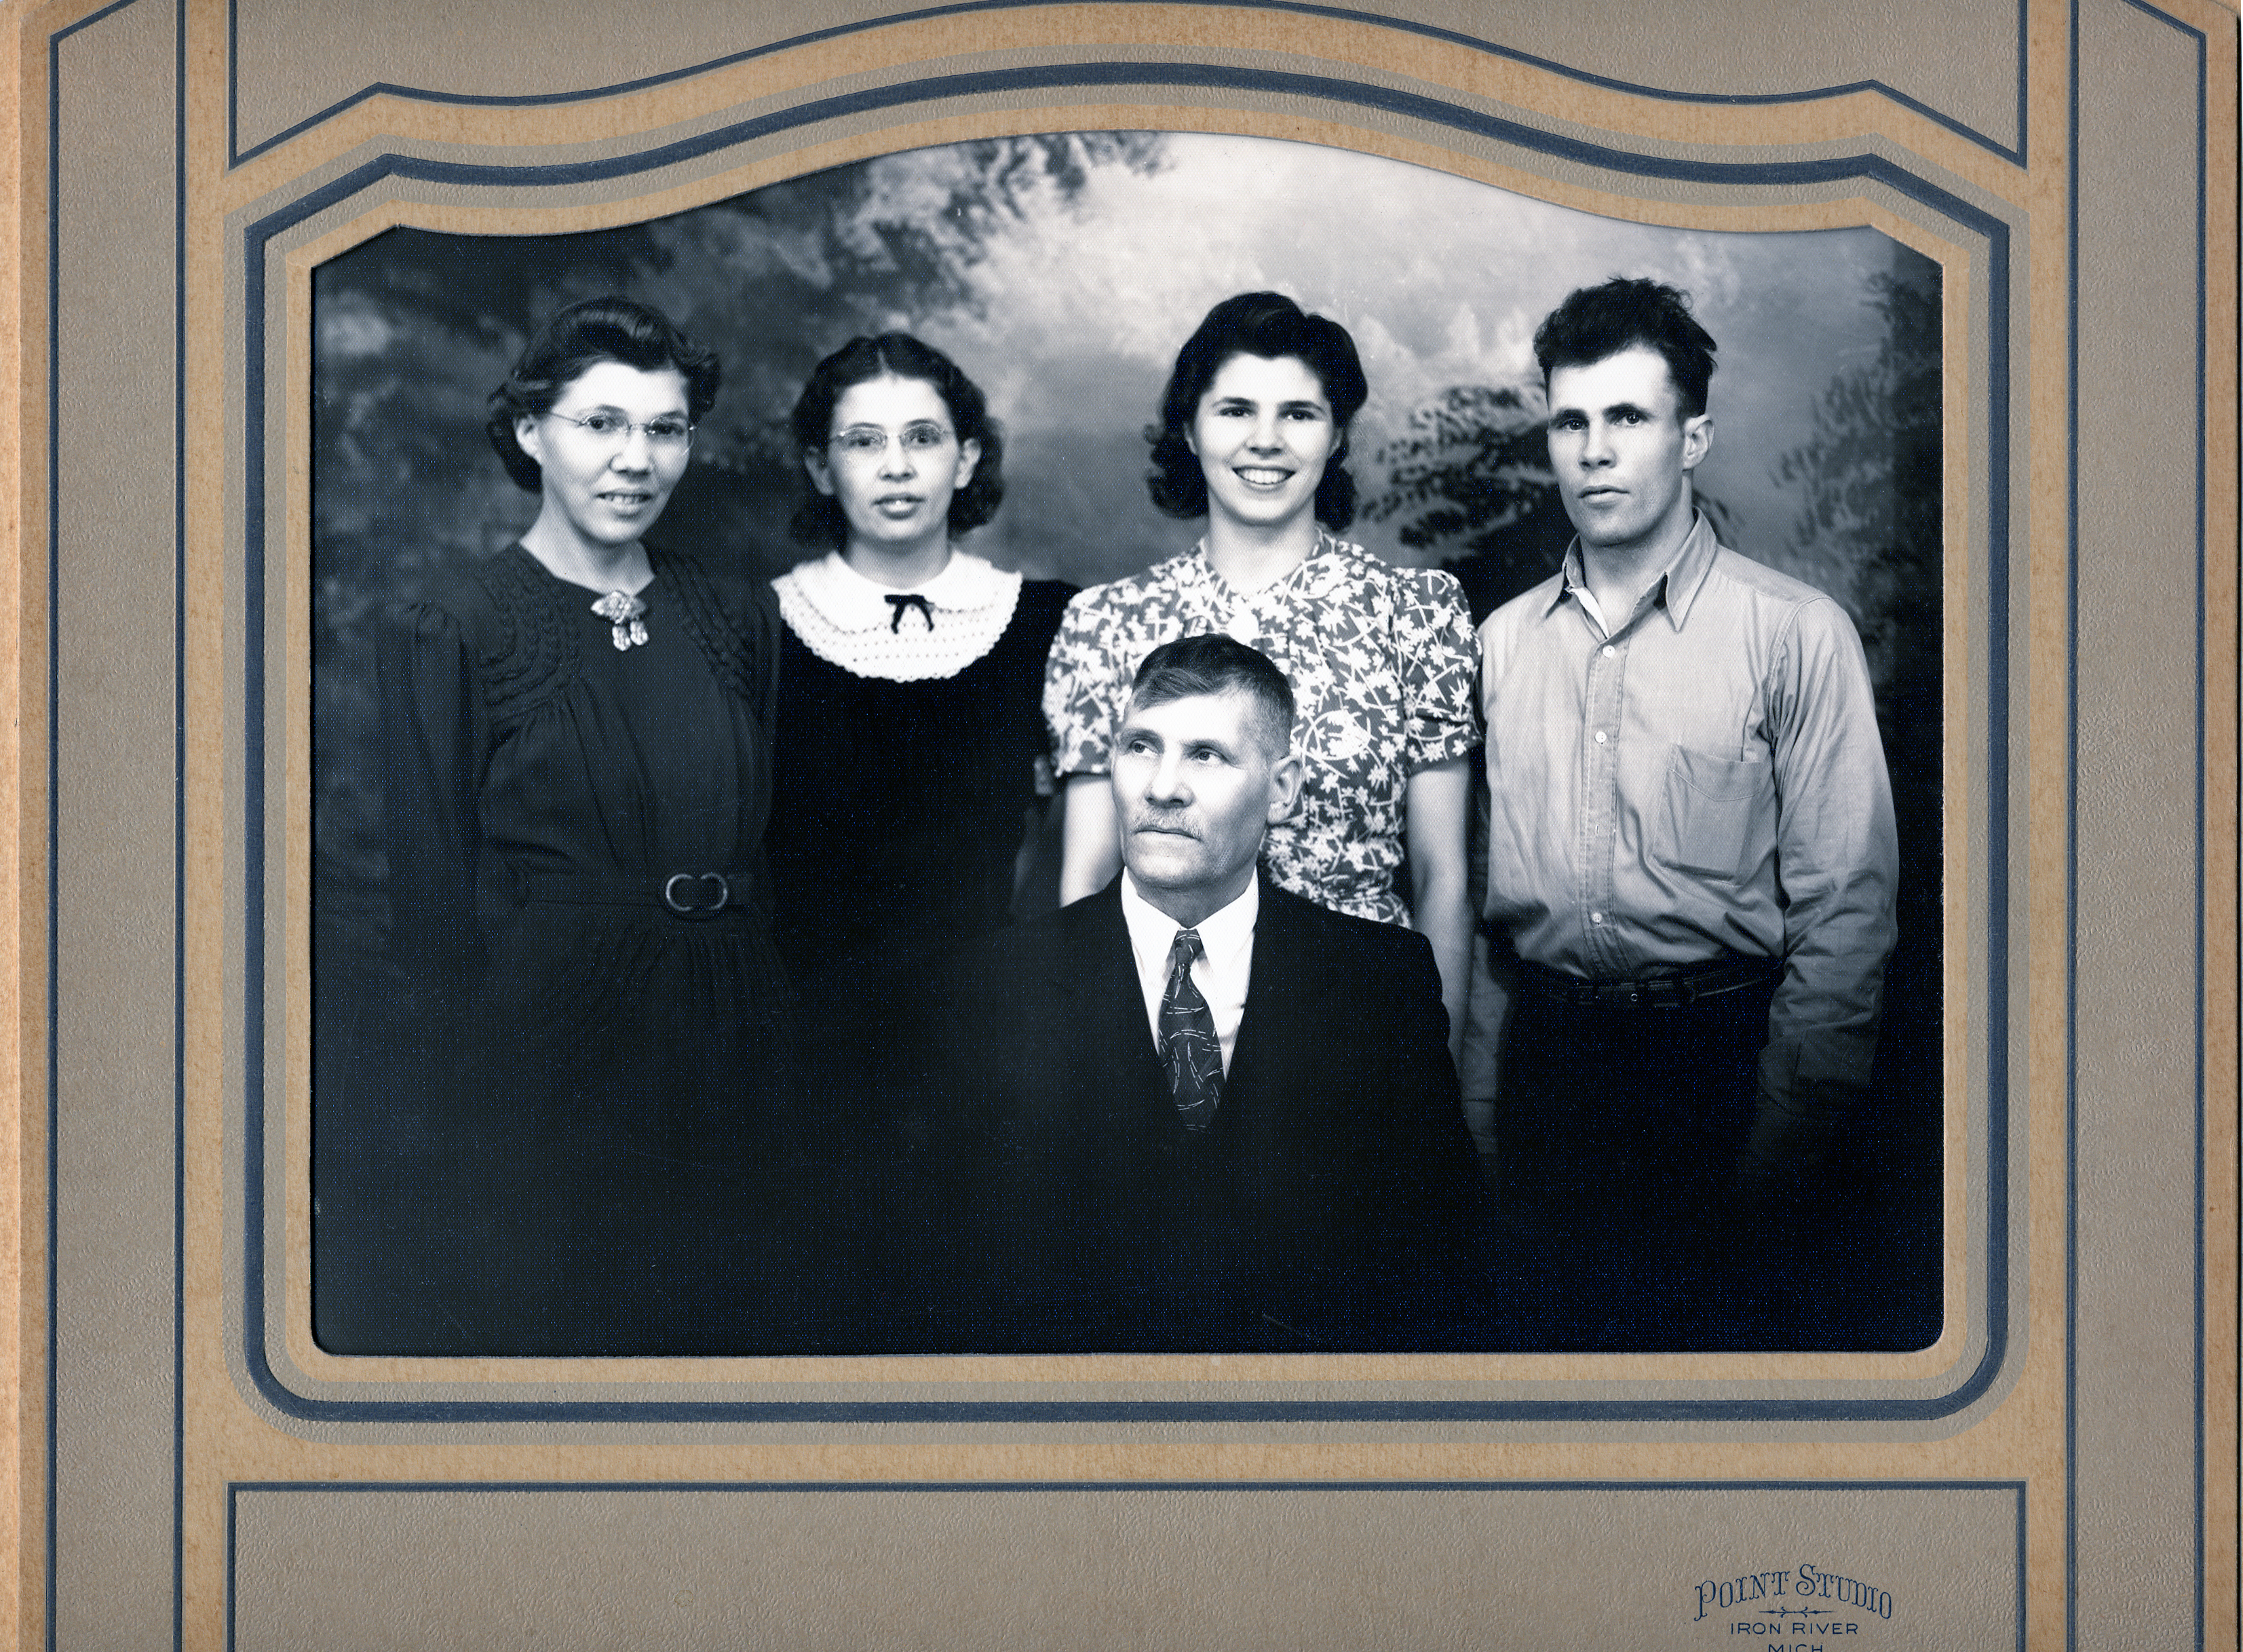 Victor Holm and his children in a studio photograph